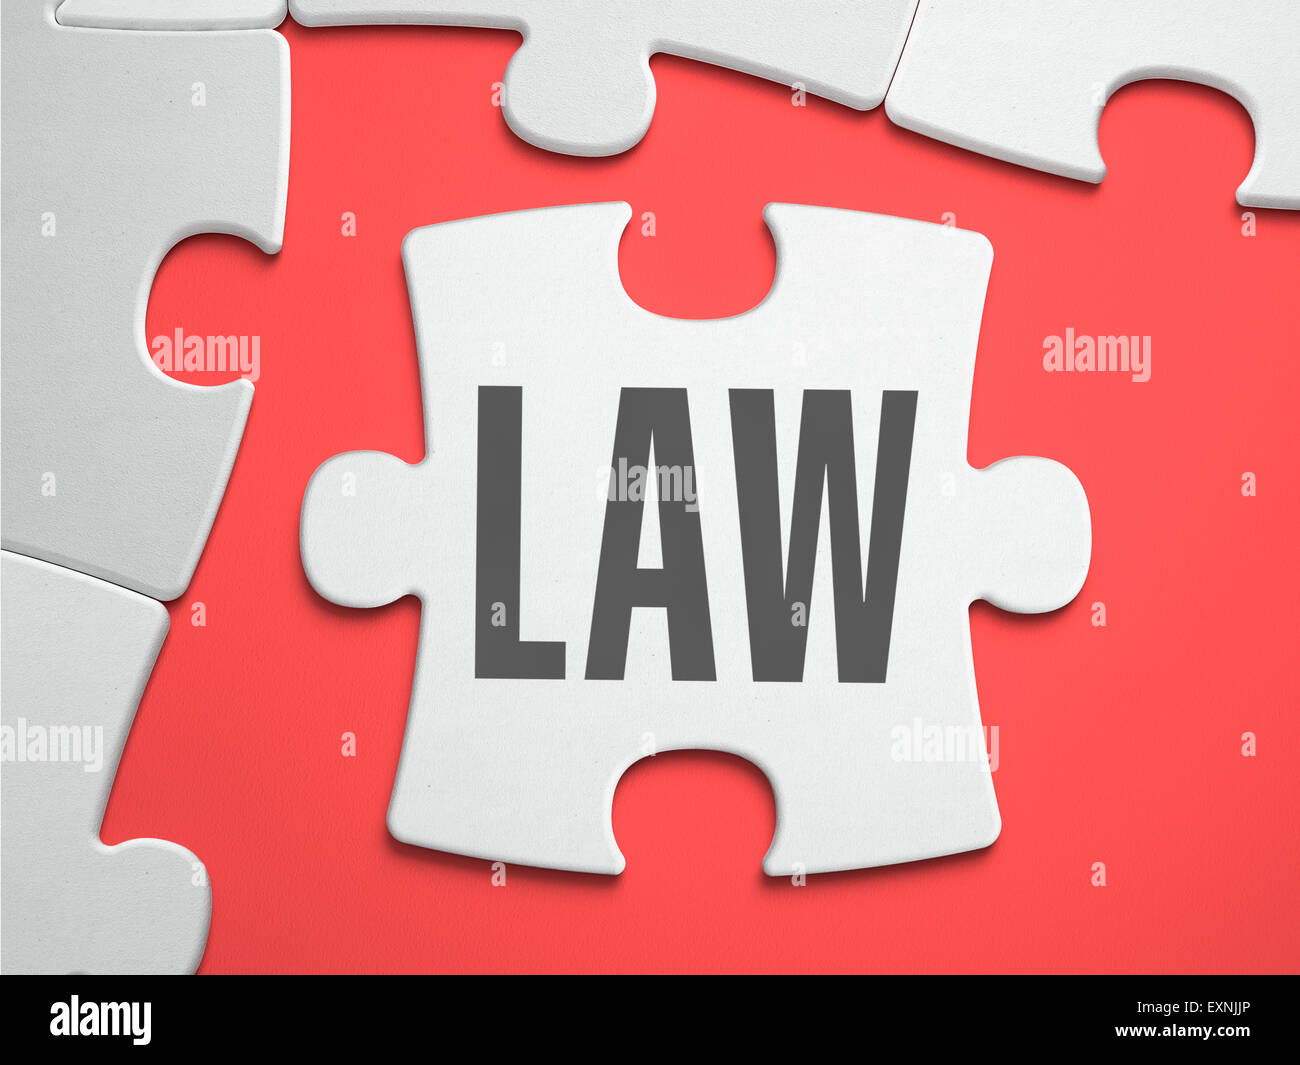 Law - Puzzle on the Place of Missing Pieces. Stock Photo